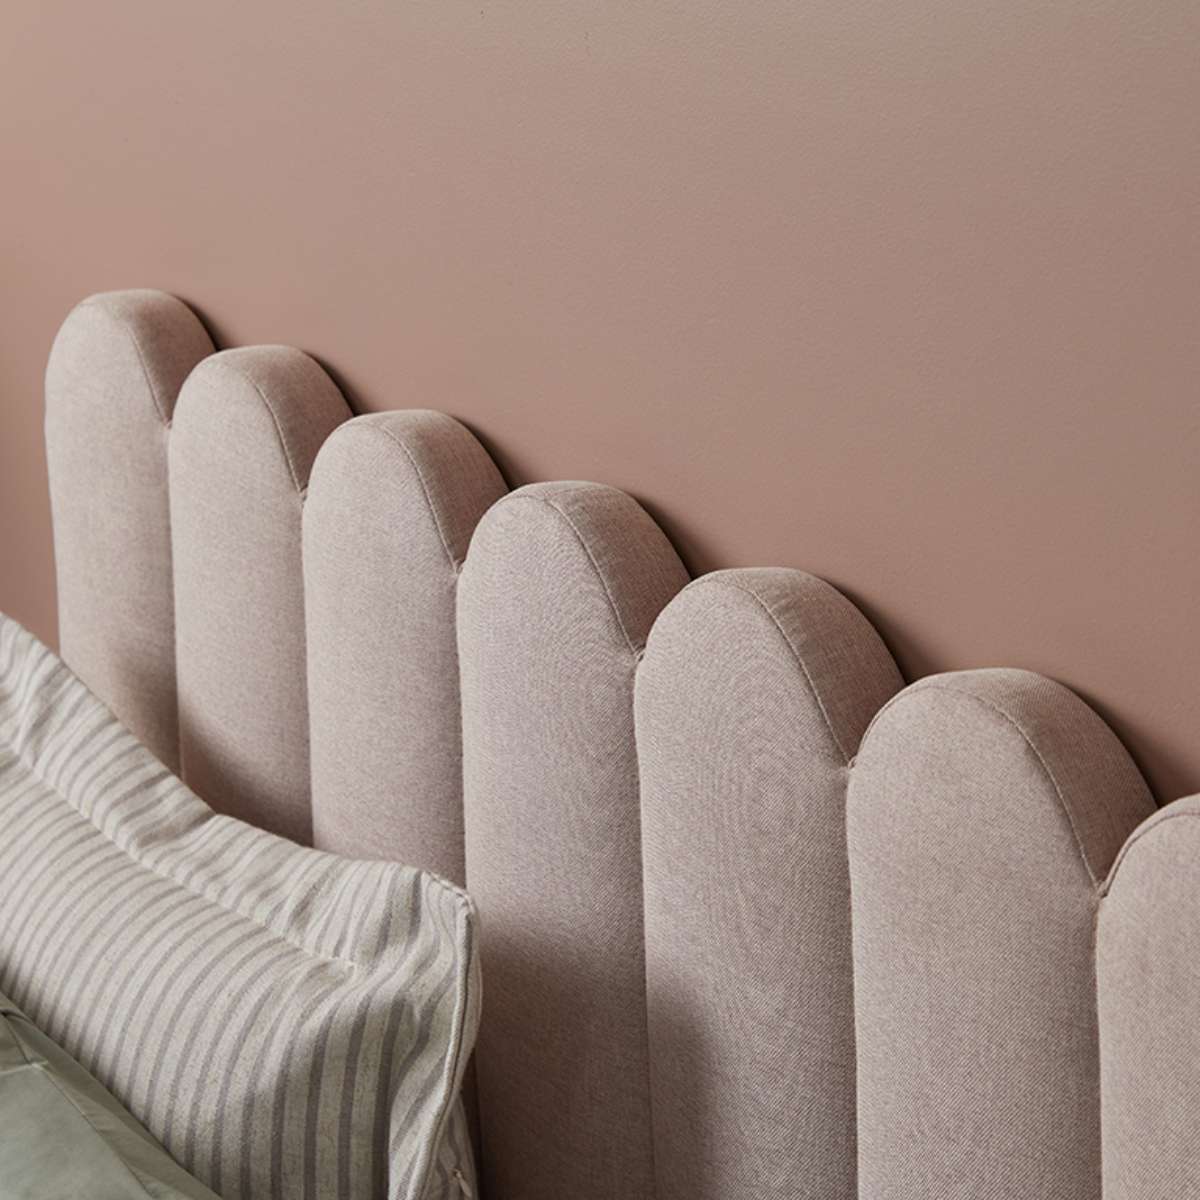 Fiona Single Bed - Dusty Pink